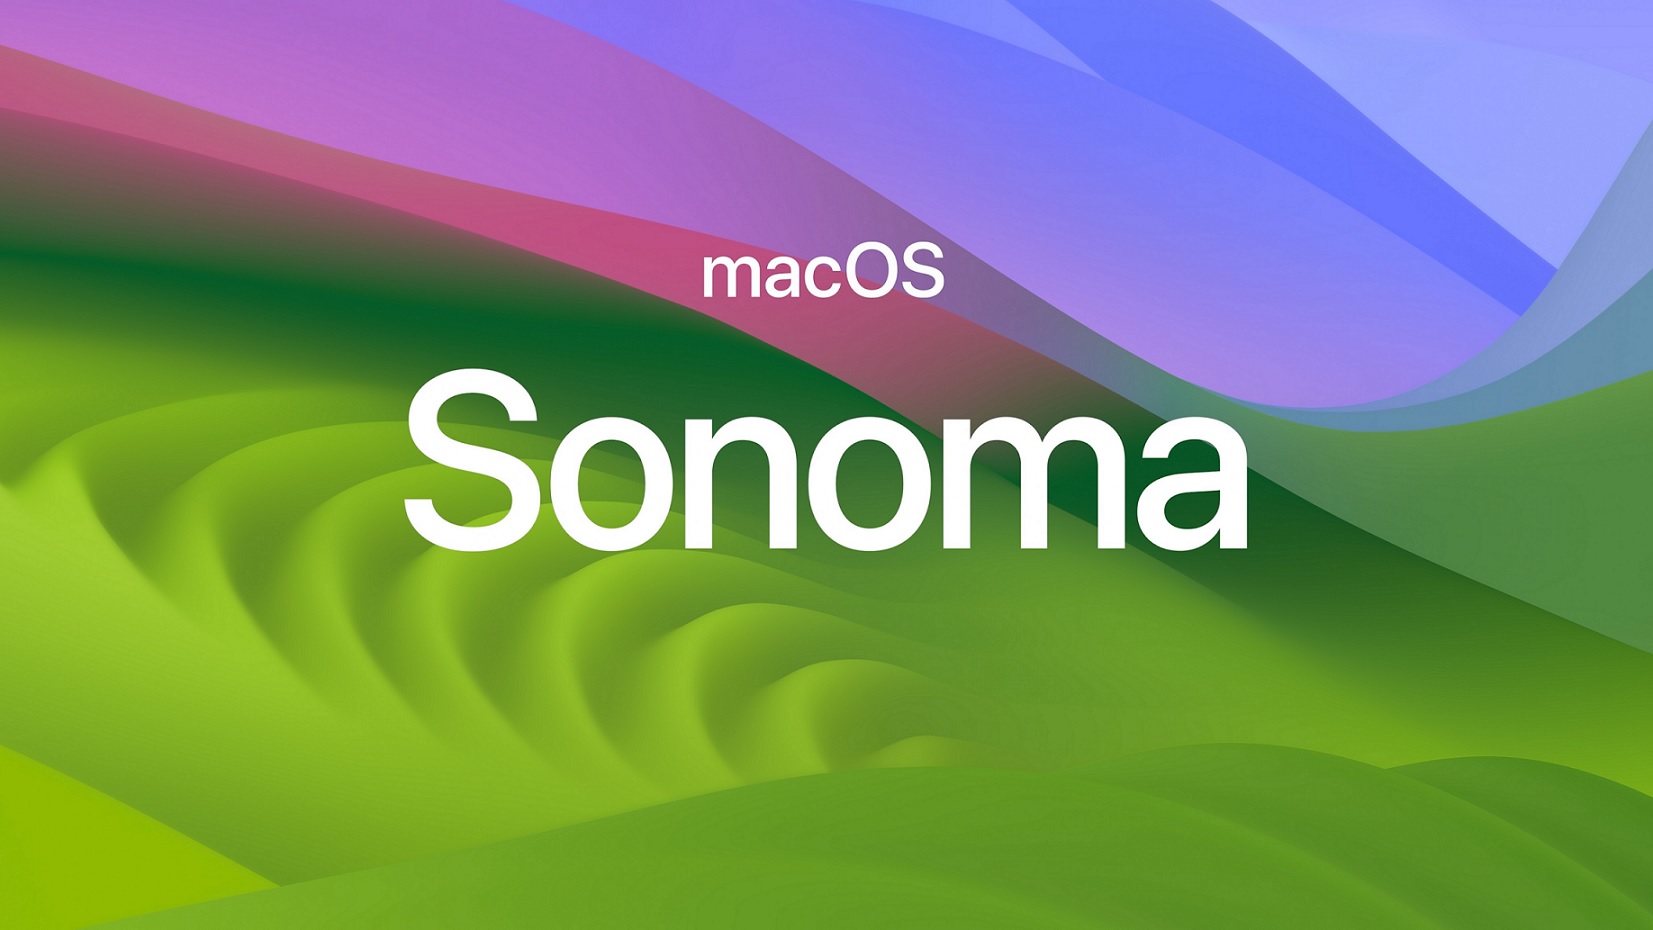 macOS Sonoma wallpapers download